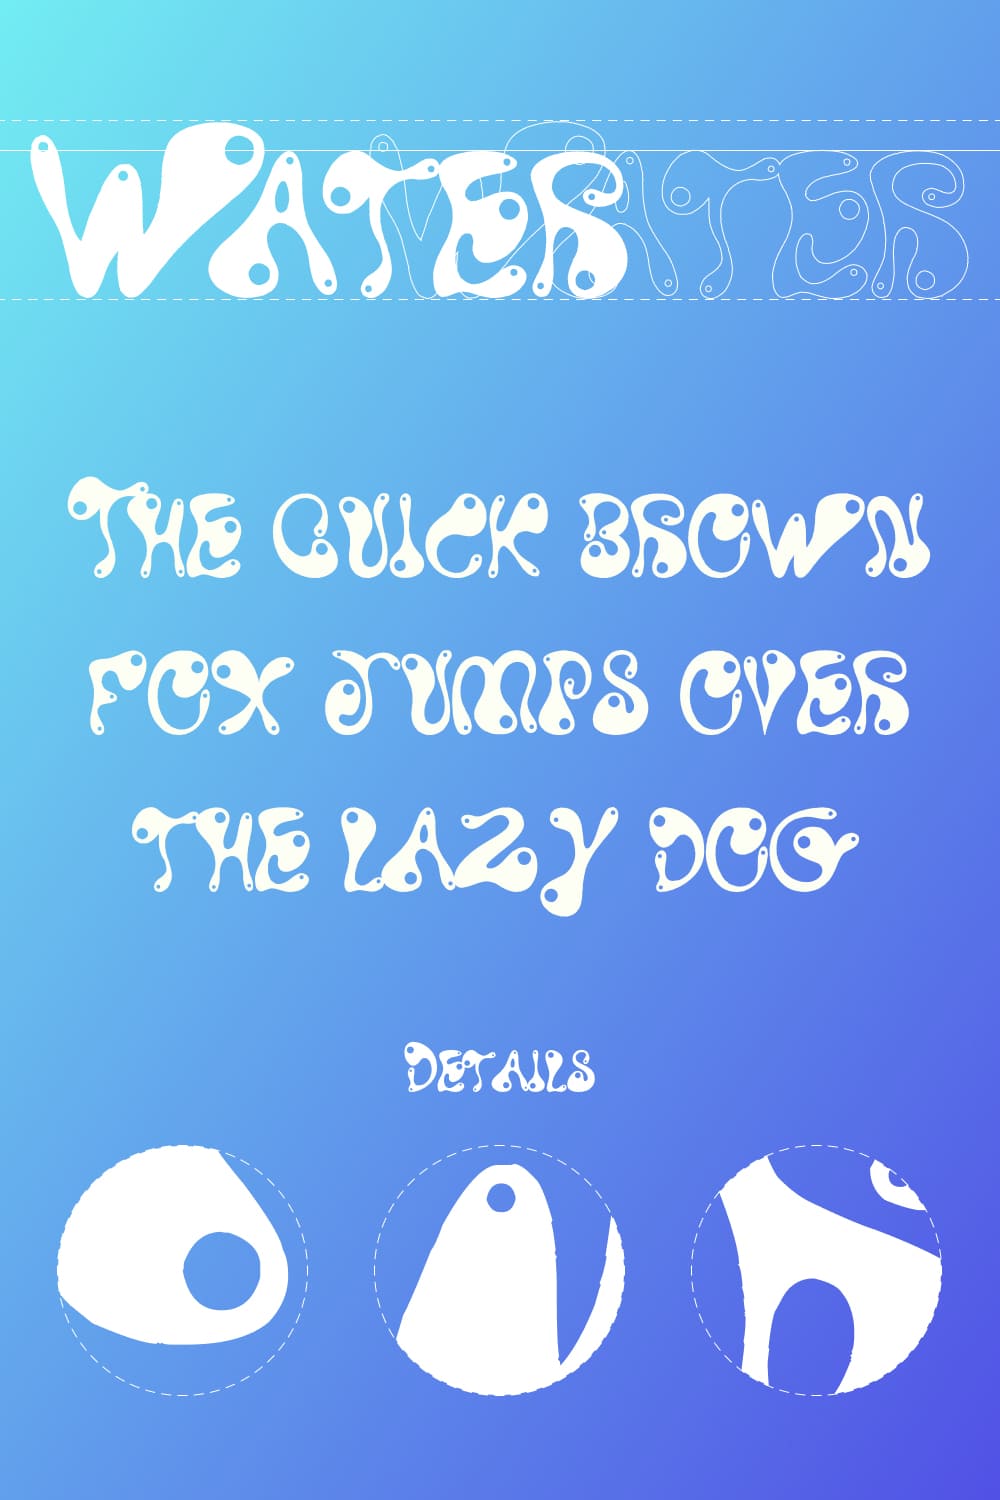 This font has many details that are gathered in one picture.